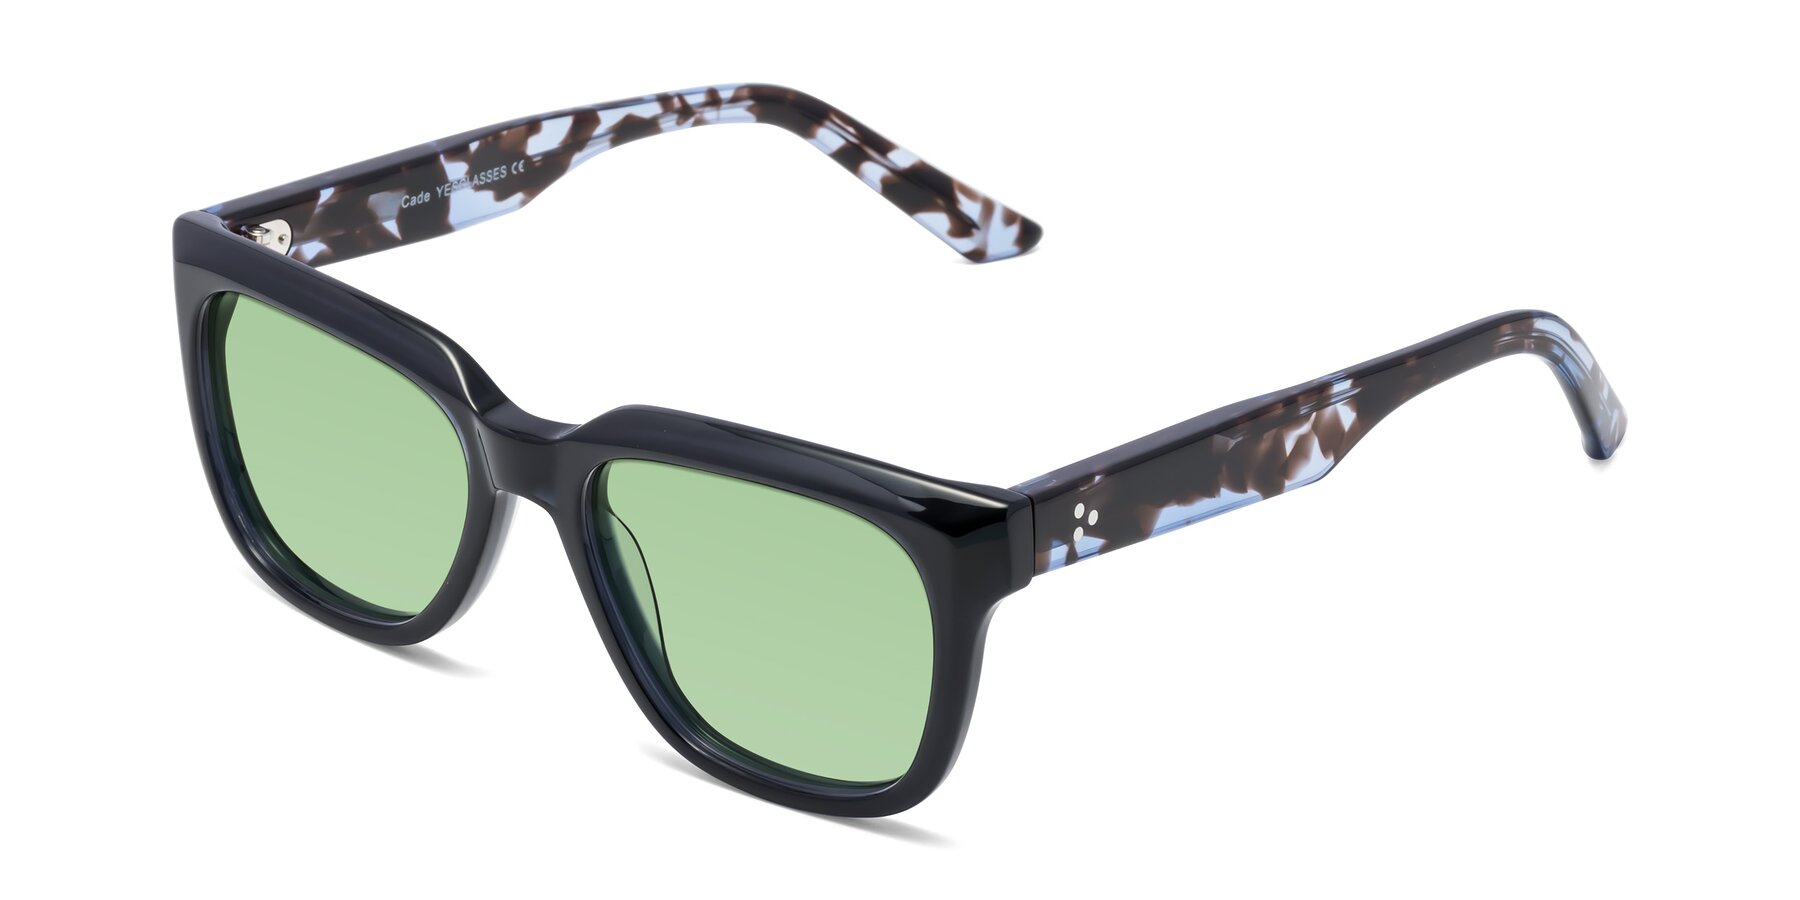 Angle of Cade in Dark Blue-Tortoise with Medium Green Tinted Lenses